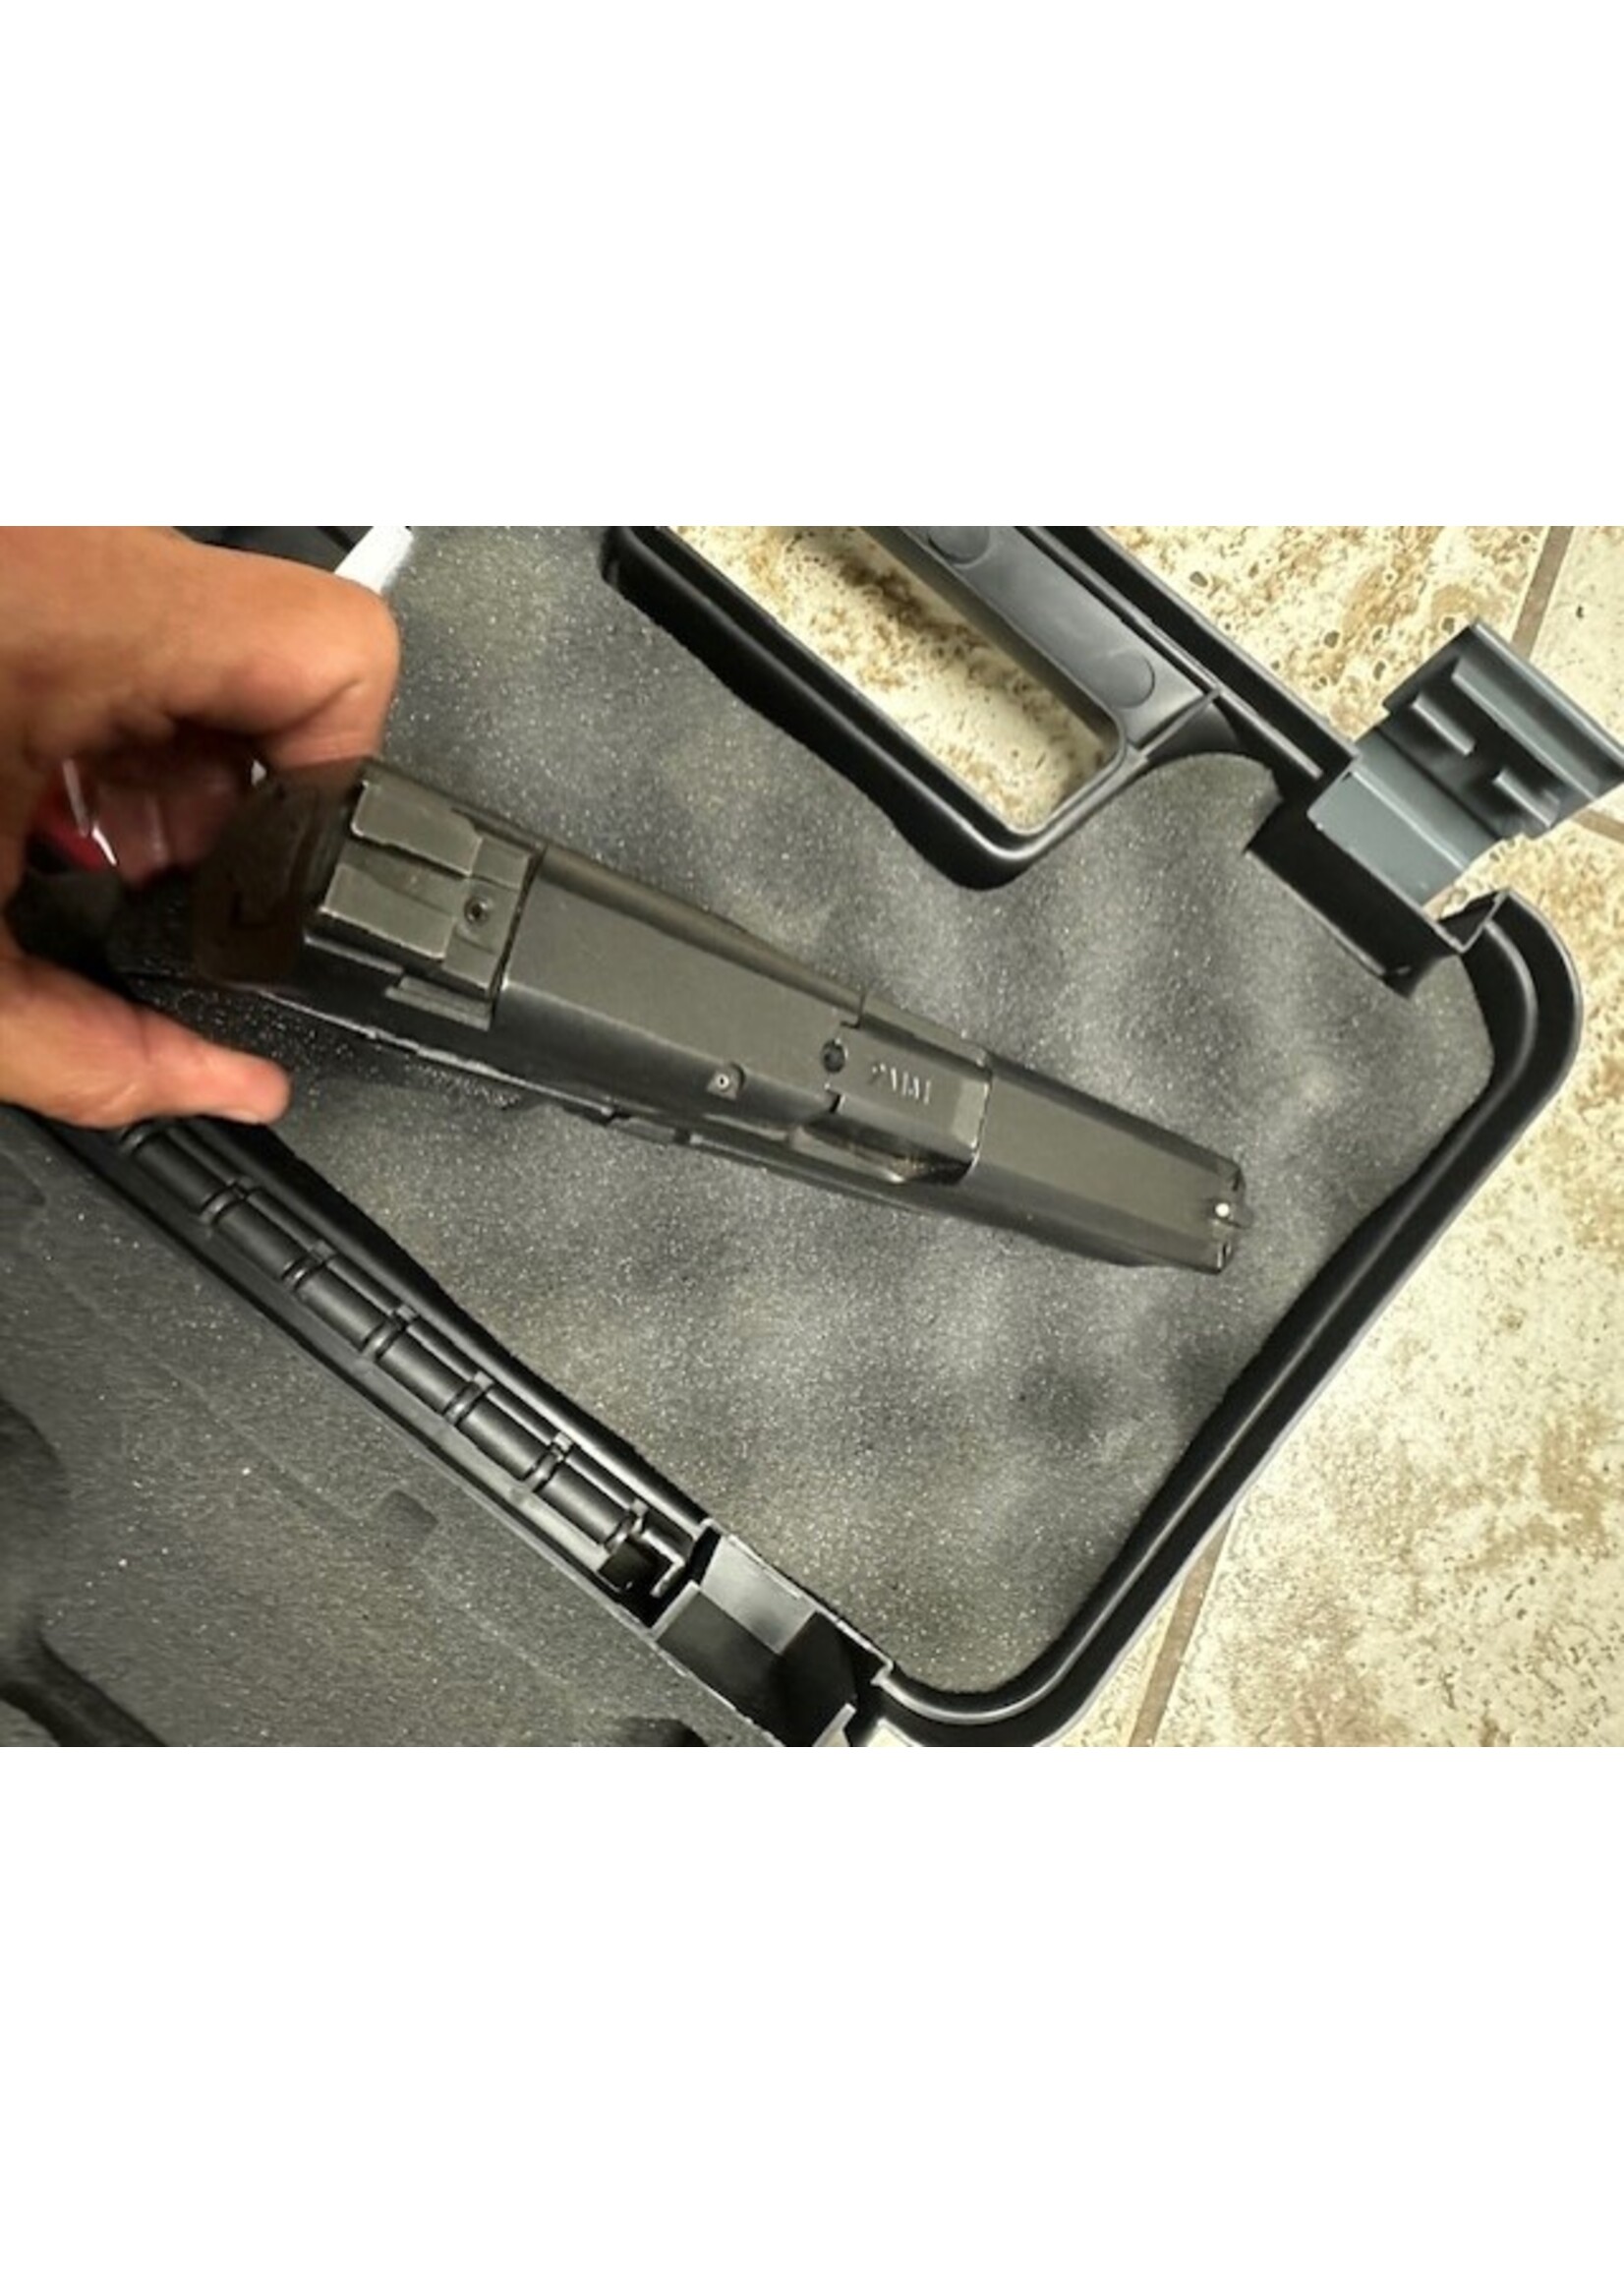 SMITH & WESSON USED LIKE NEW M&P COMPACT 2.0 x3 15rd Magazines